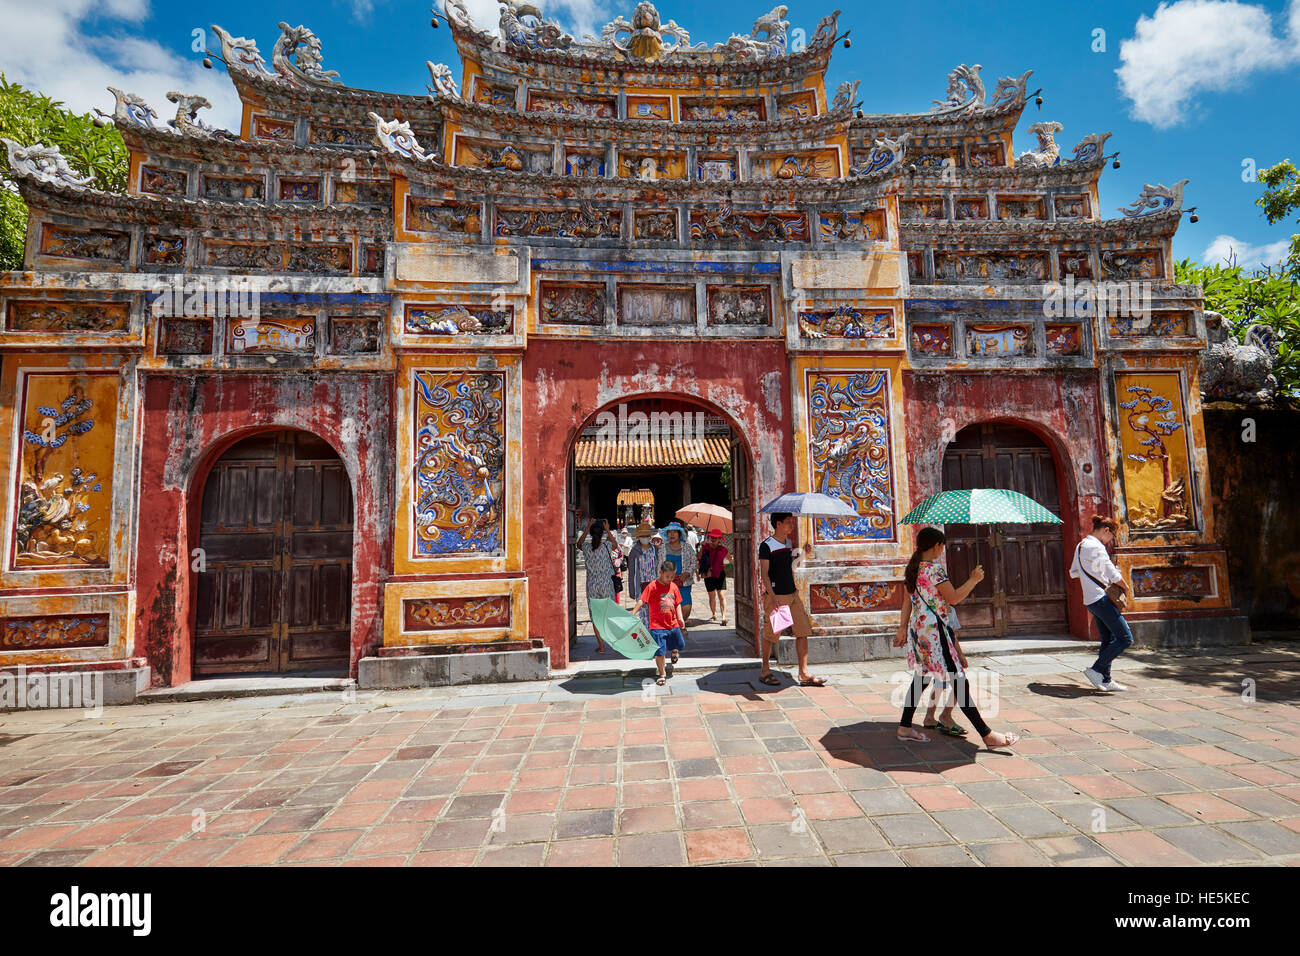 Tourists walking through an ornate entrance gate to The To Mieu Temple Compound. Imperial City (The Citadel), Hue, Vietnam. Stock Photo